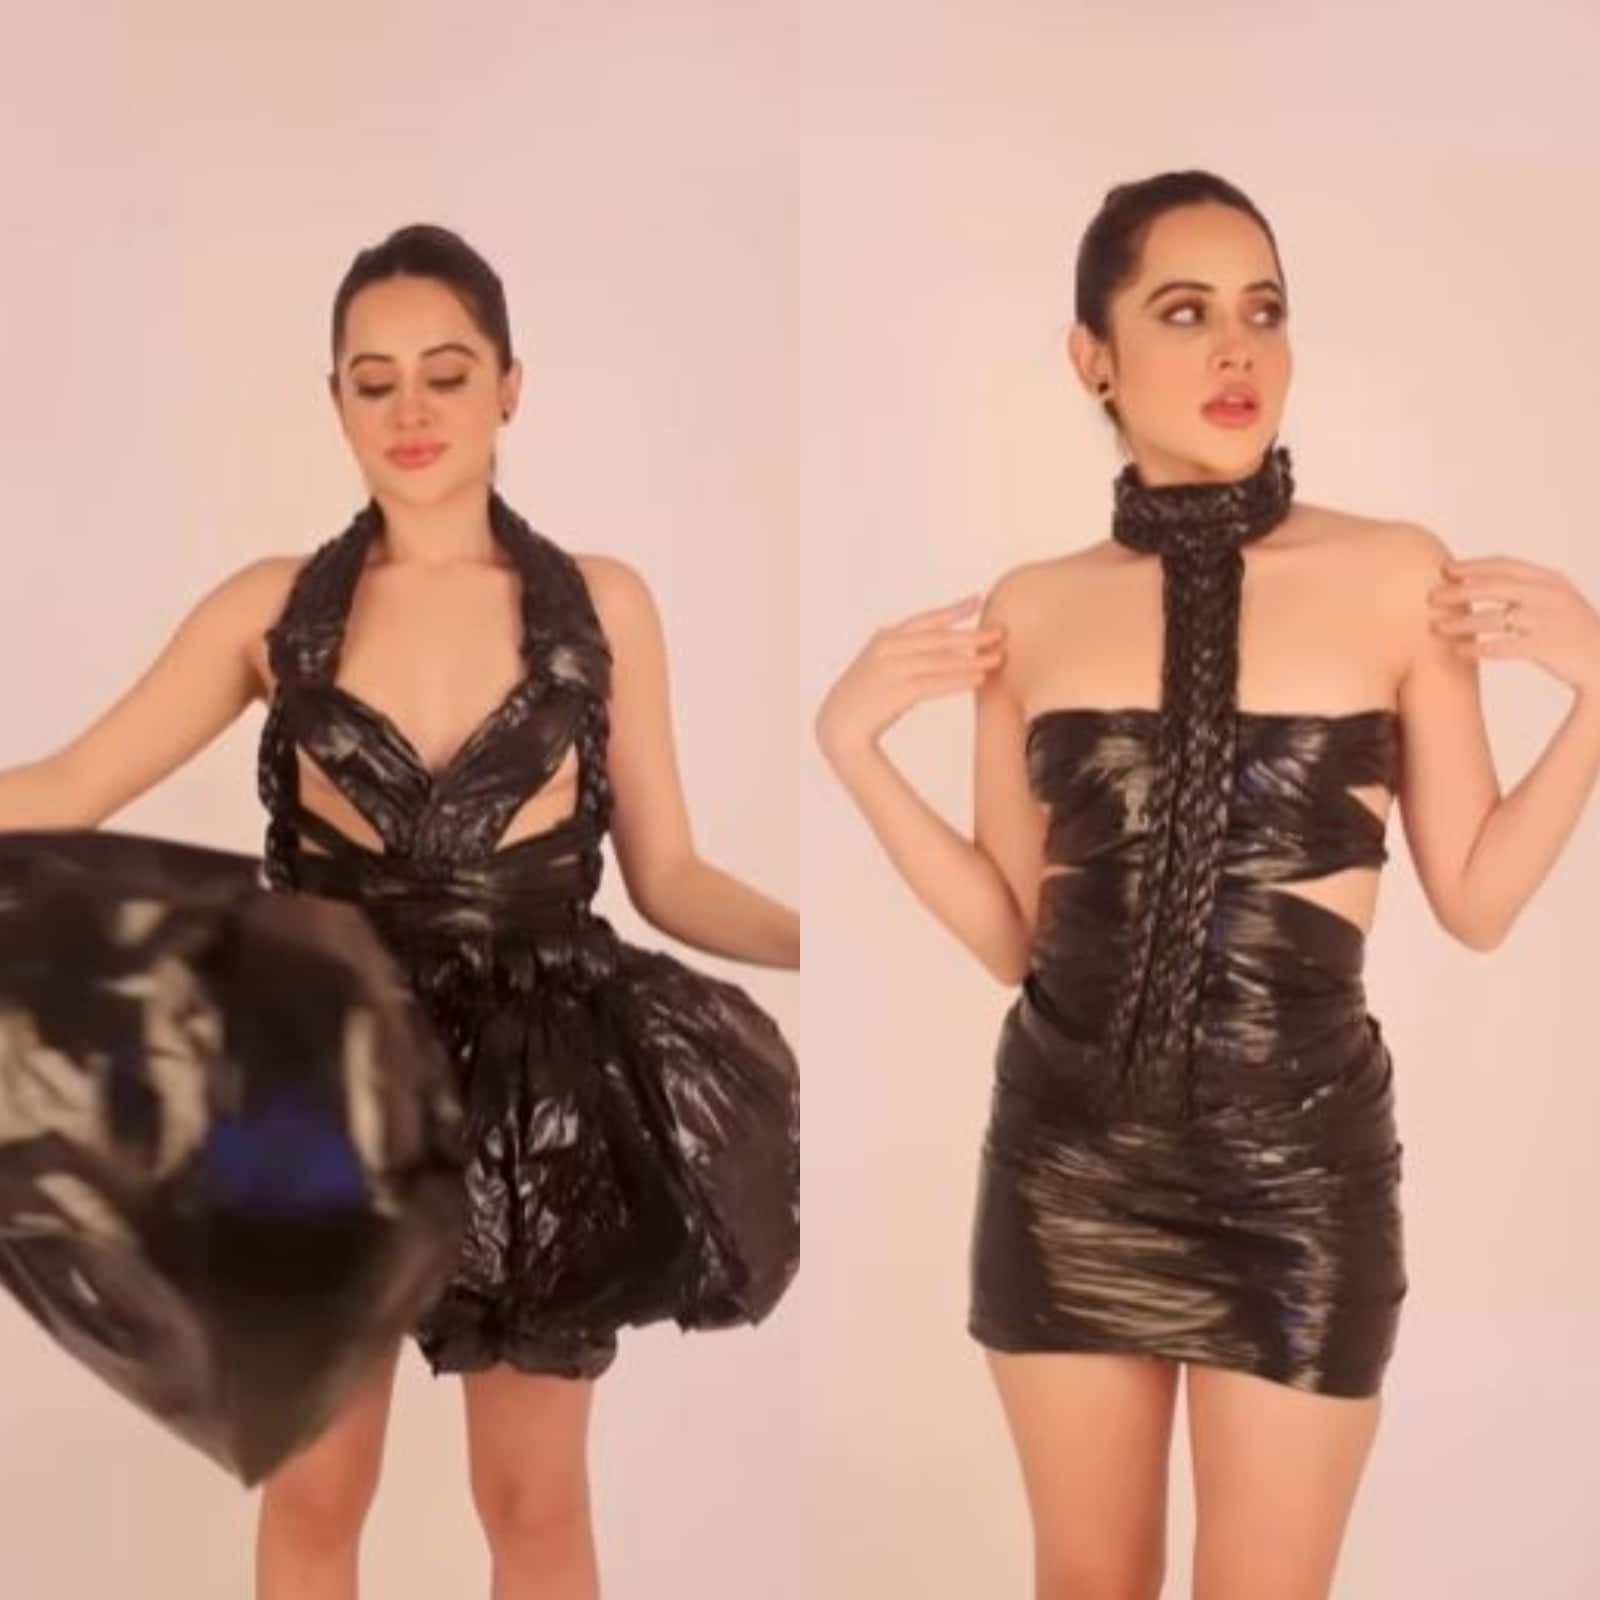 Uorfi Javed Could Literally Wear This DIY Garbage Bag Dress On A